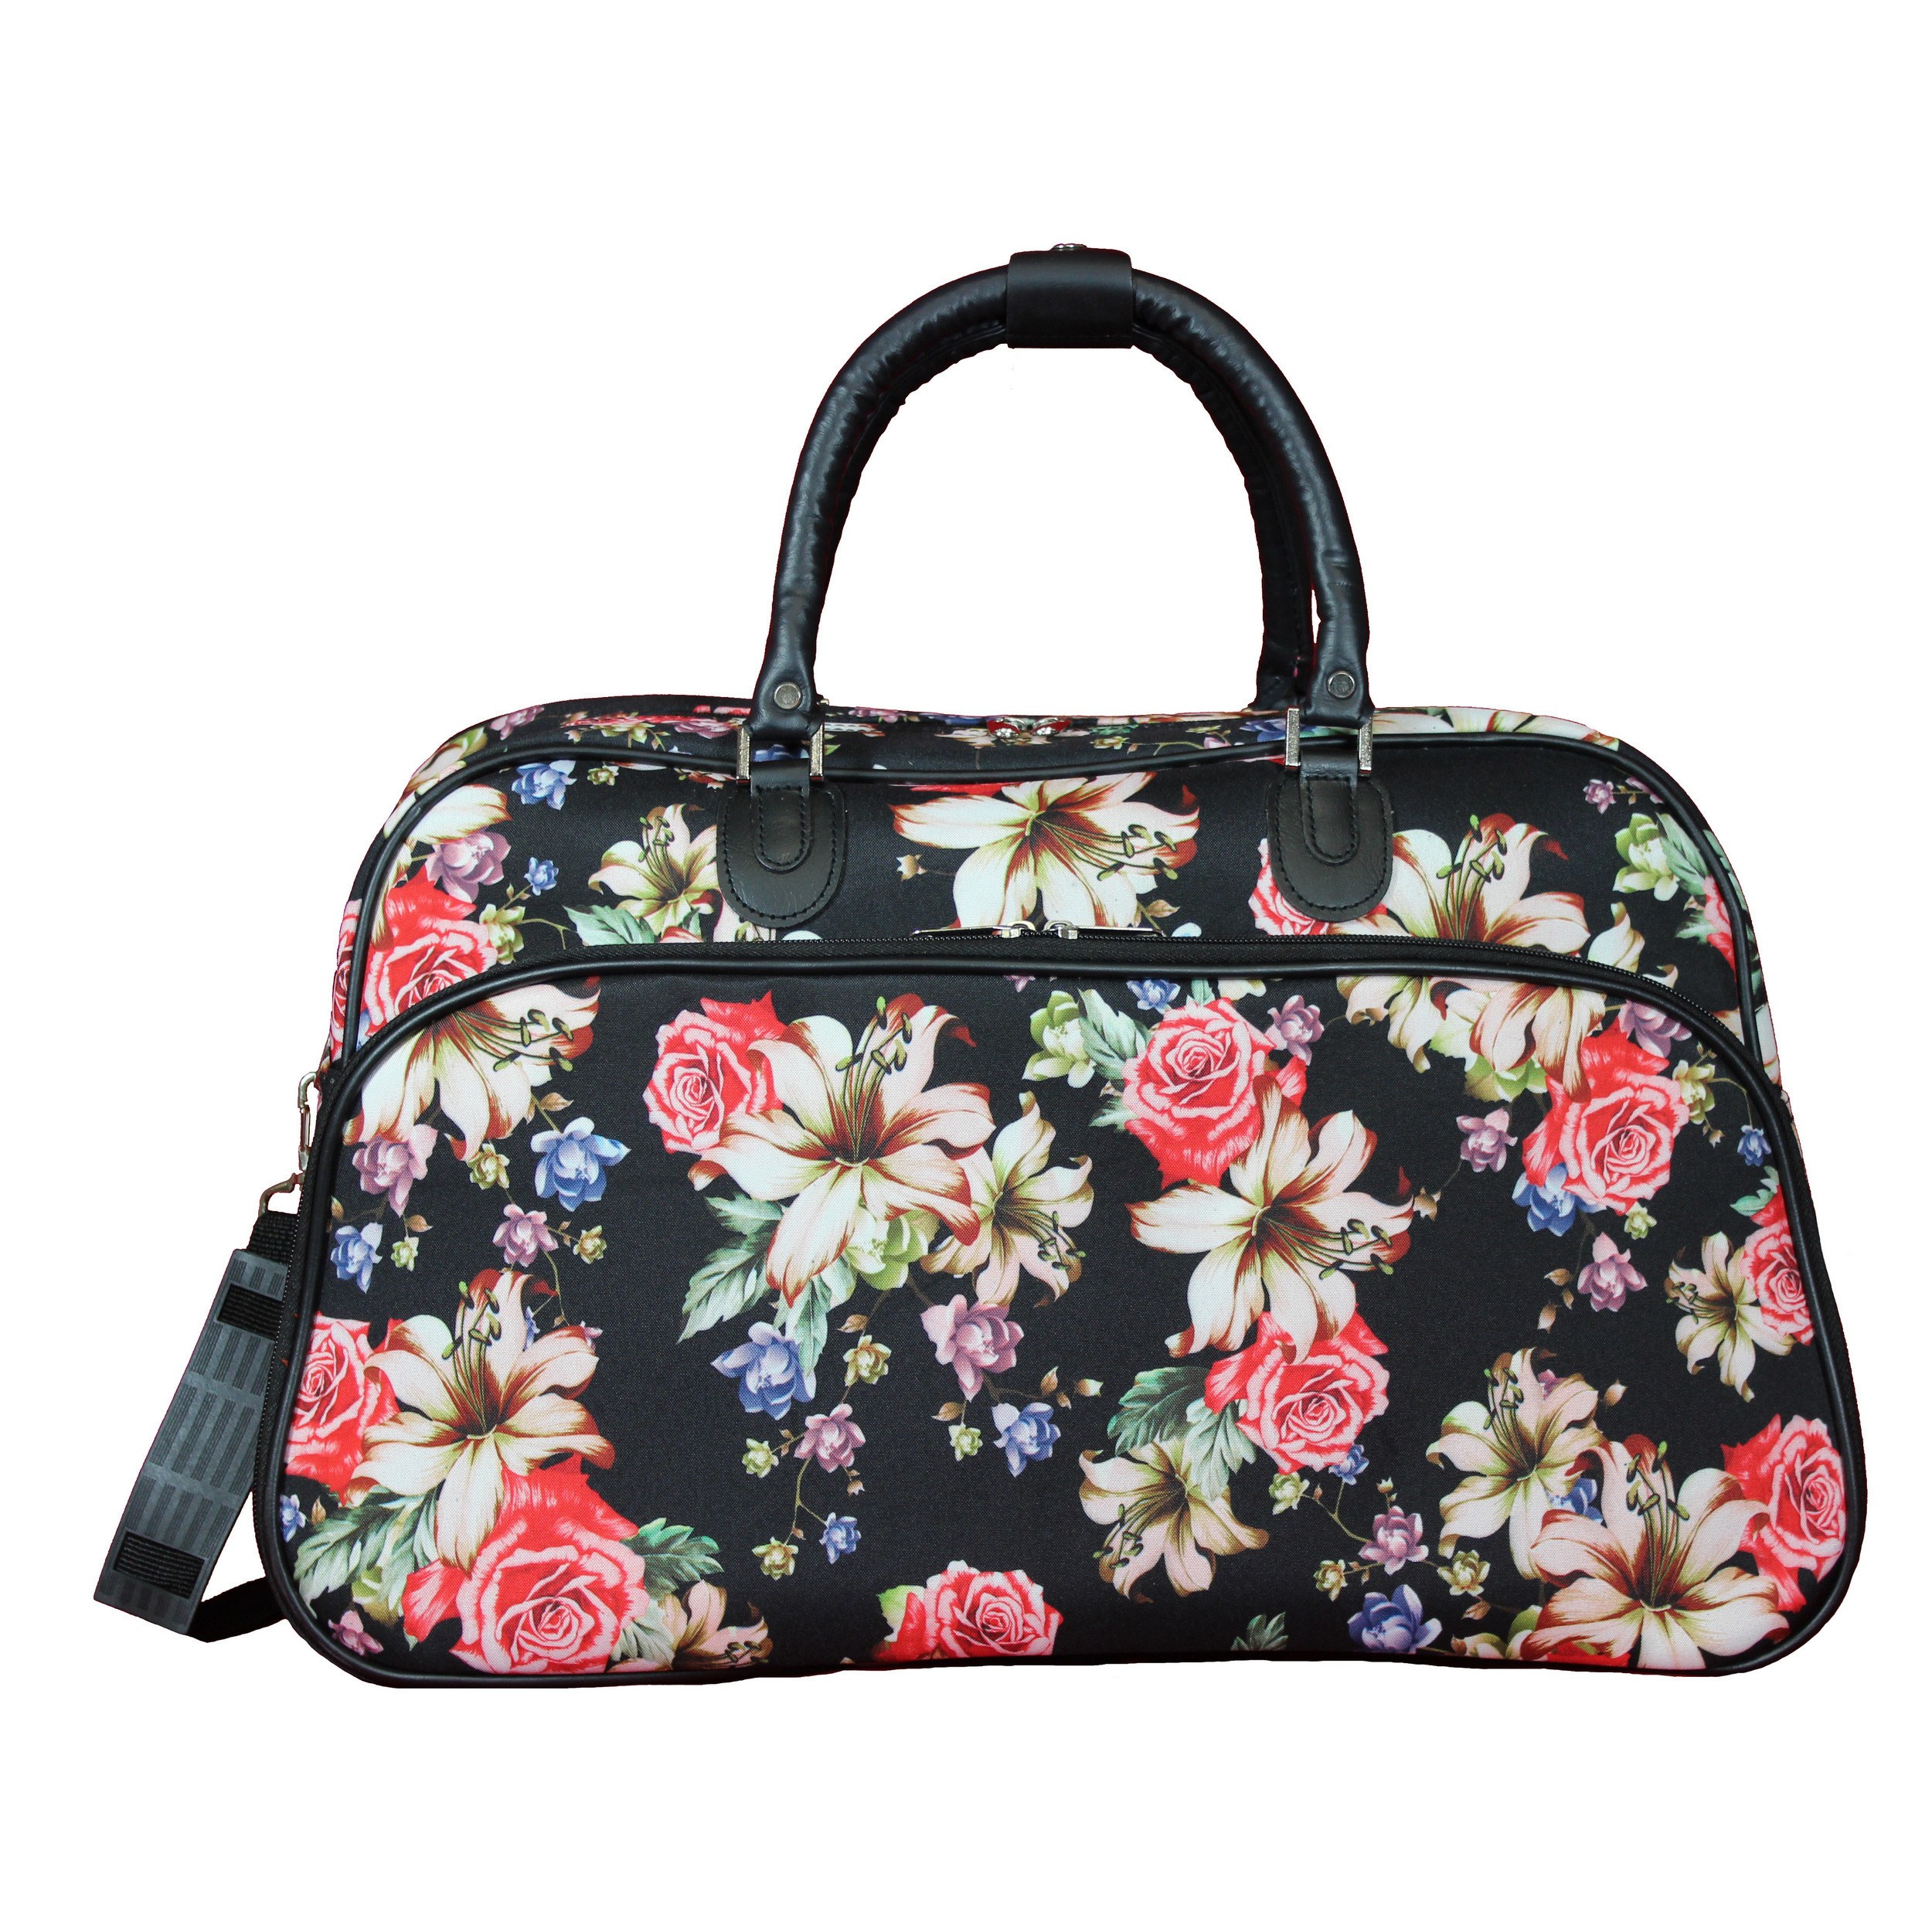 World Traveler 21-inch Carry-on Duffel Bag - Rose Lily - image 2 of 2